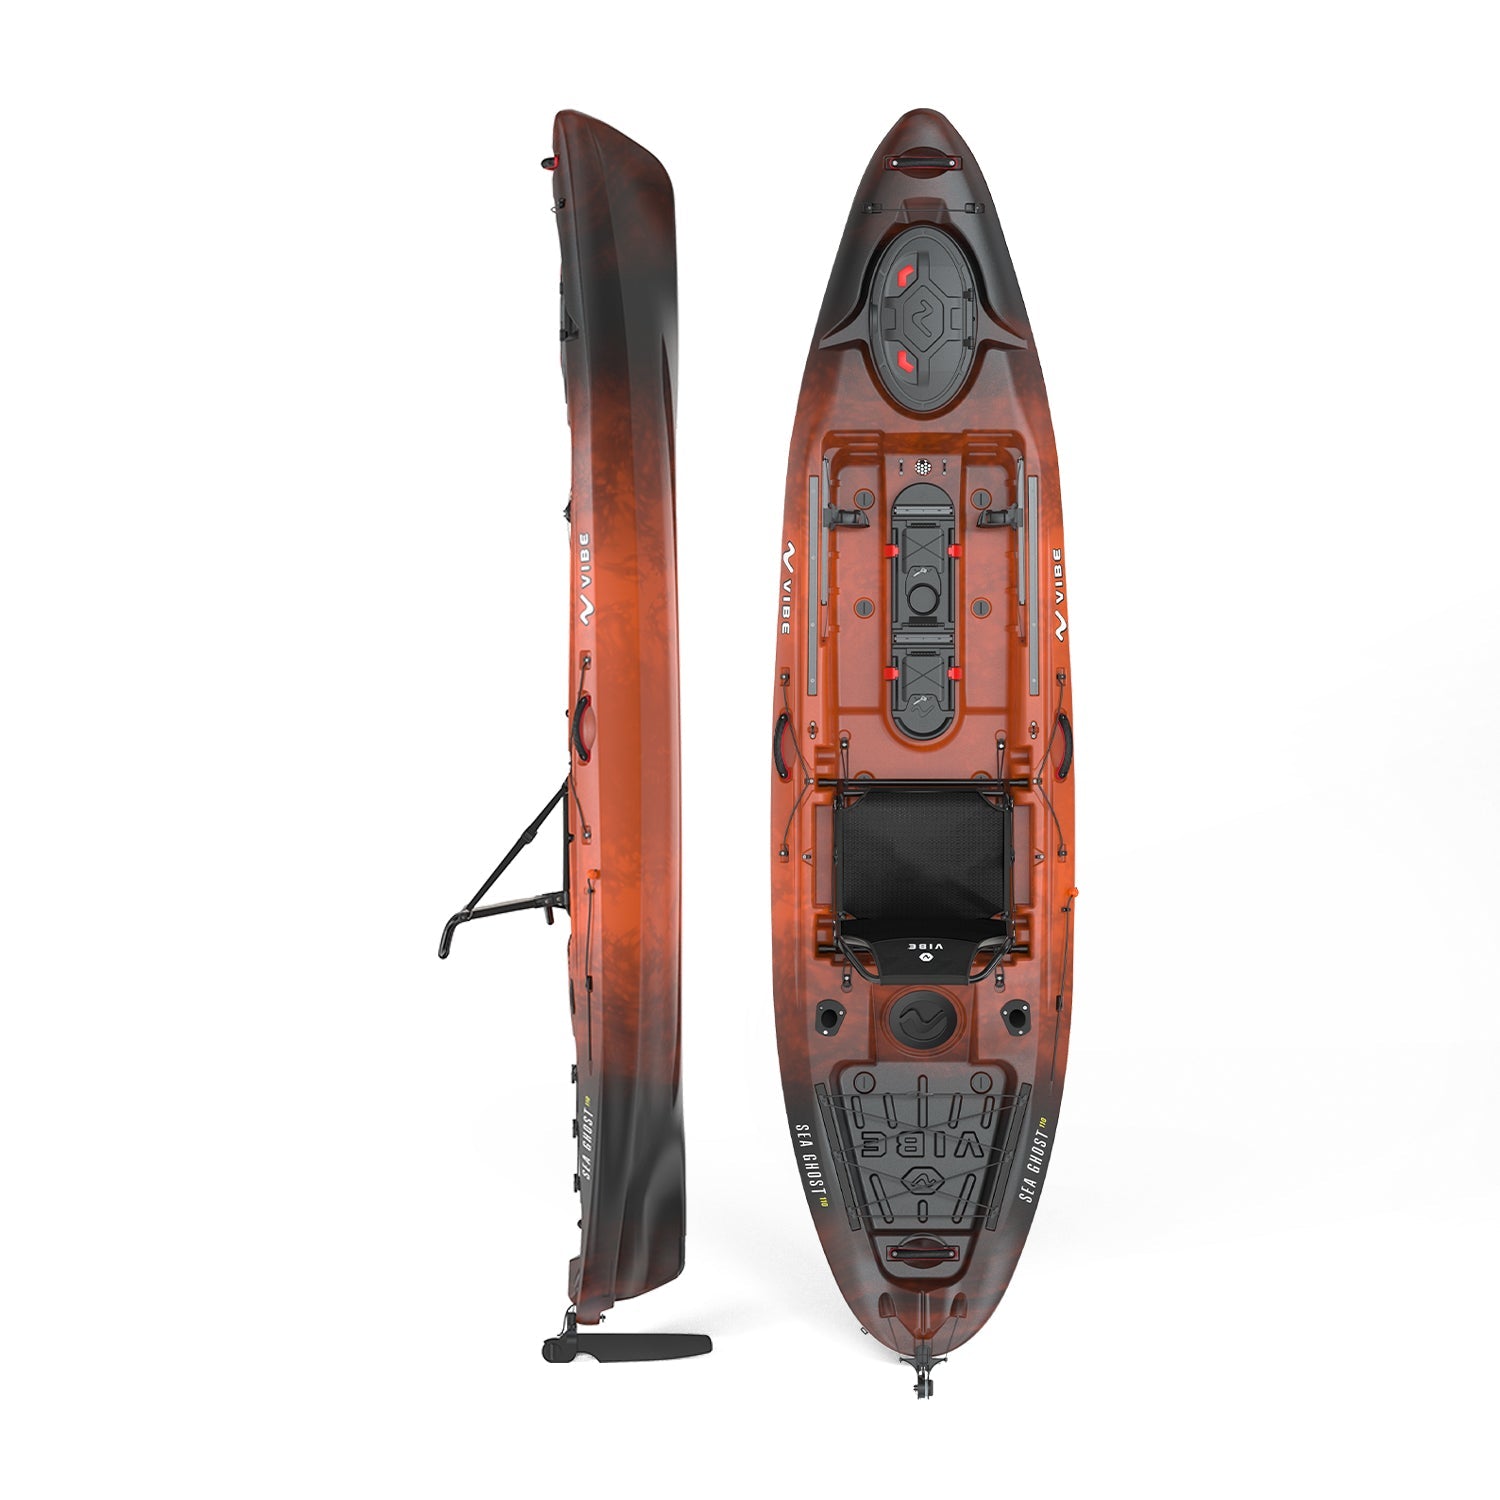 Inexpensive custom console for sit inside fishing kayaks